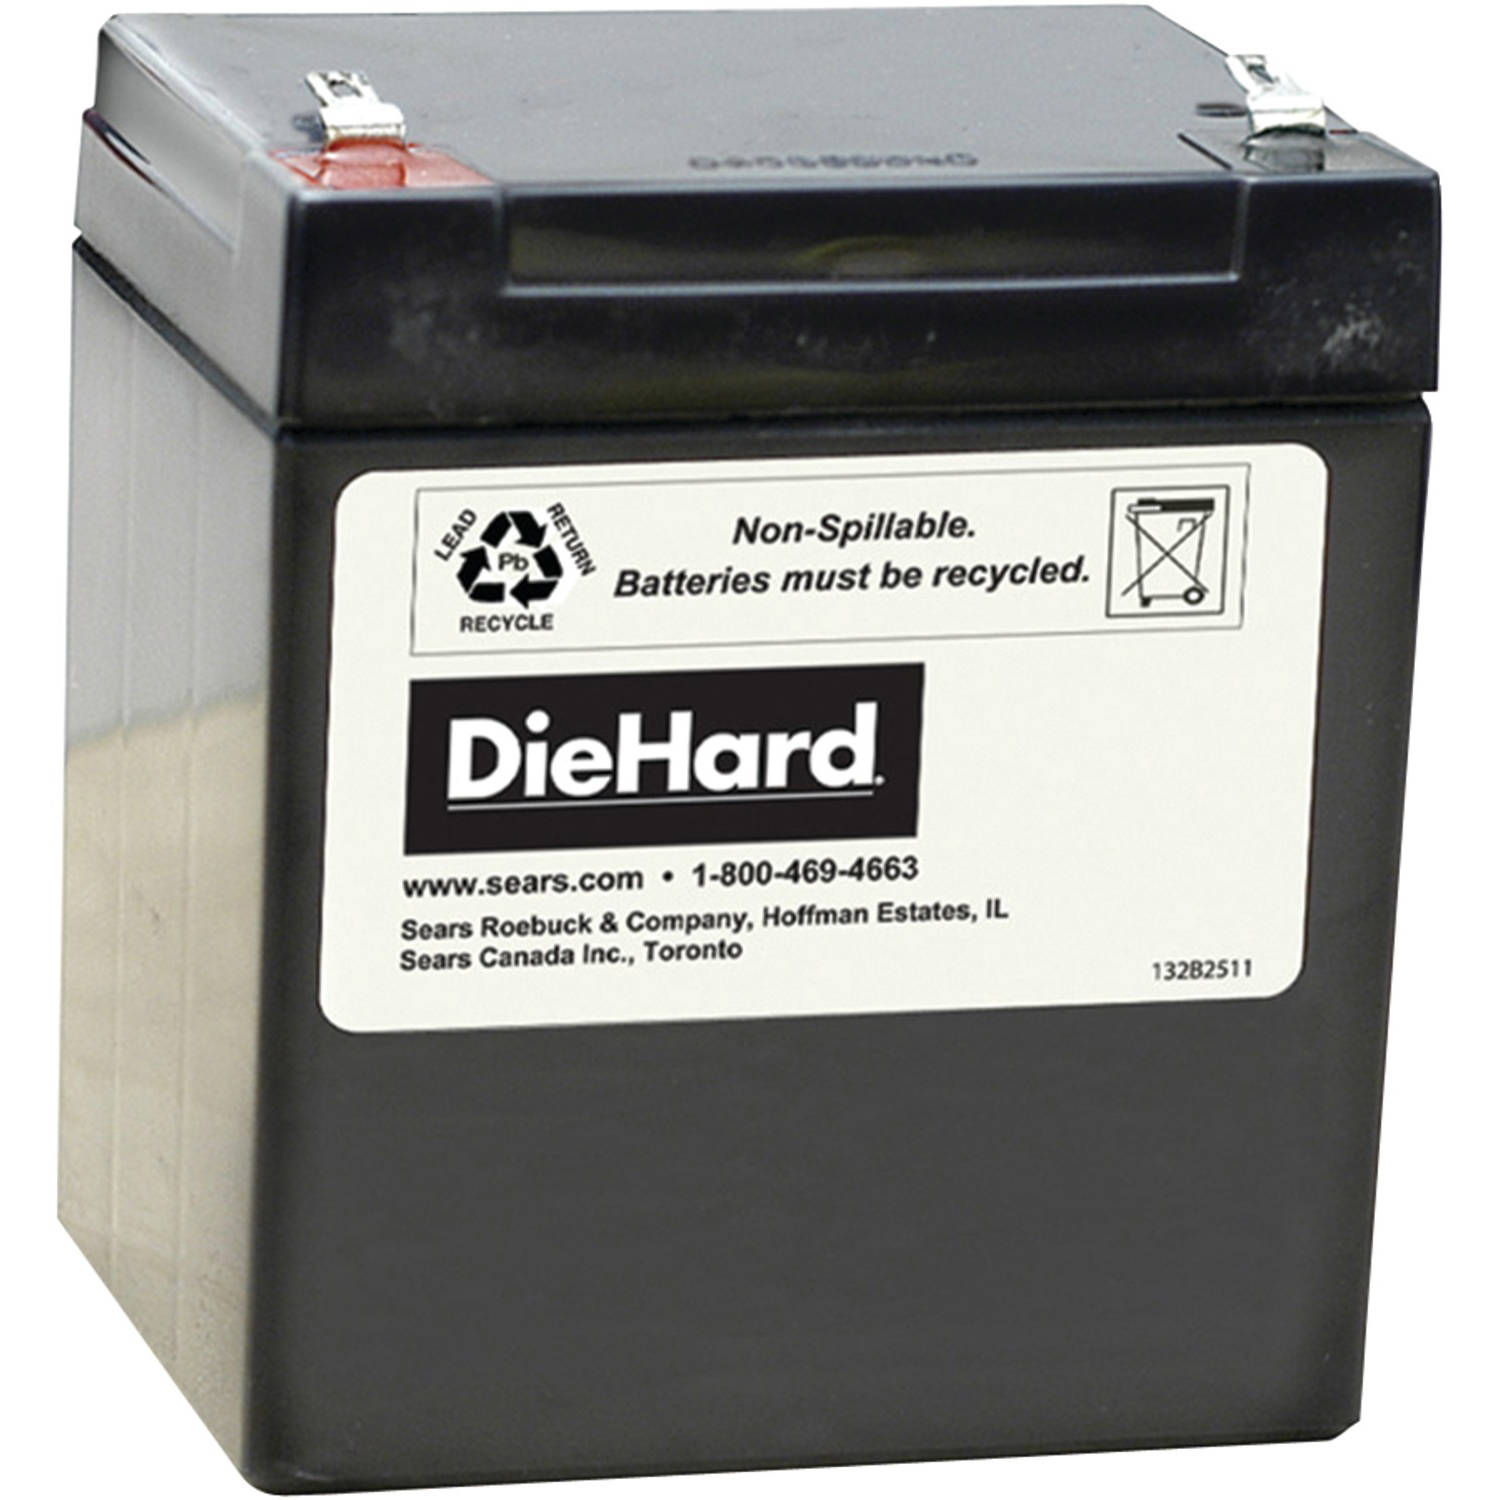 Chamberlain 4228 Replacement Battery for Garage Access Systems - image 1 of 1